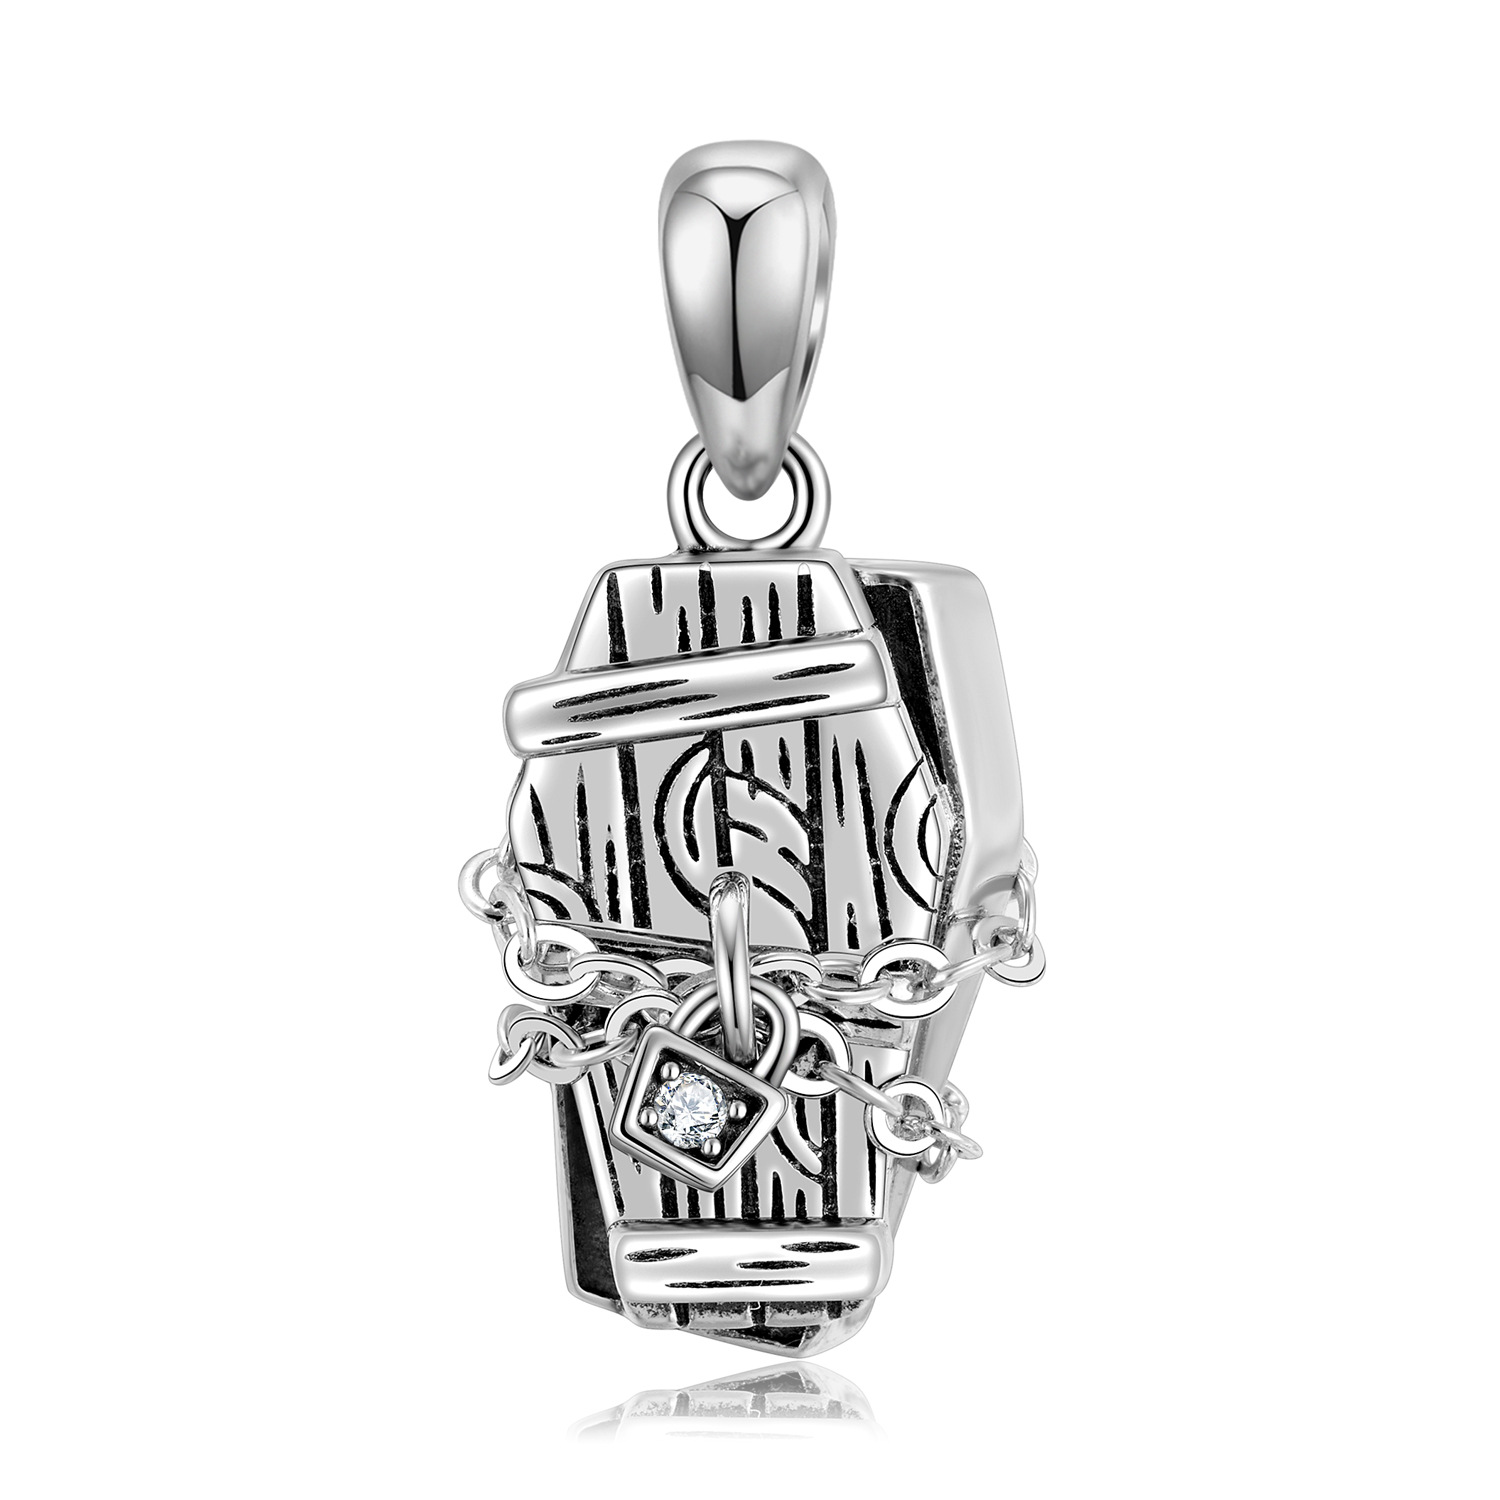 Cz Seal Coffin Chain Sterling Silver Pendant Necklace